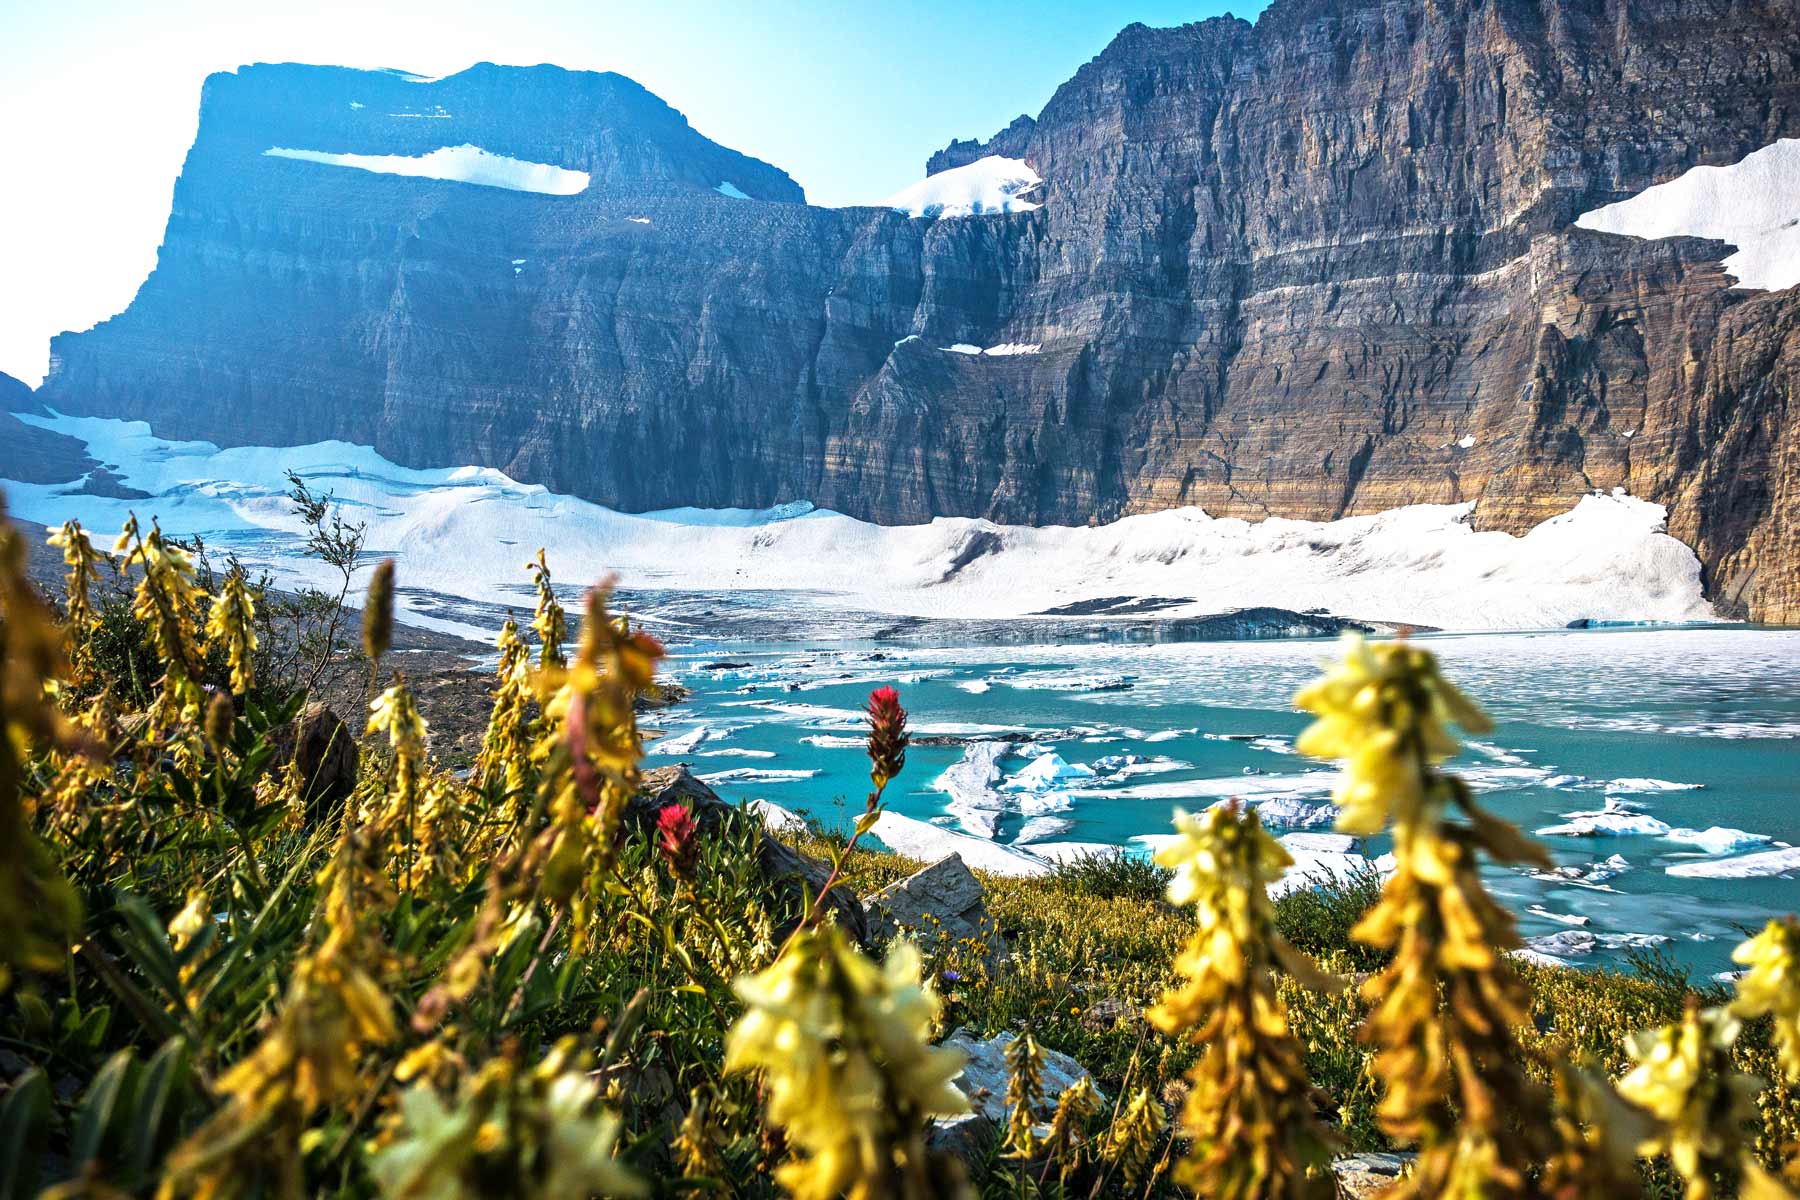 grinnell glacier, thigns to do glacier national park